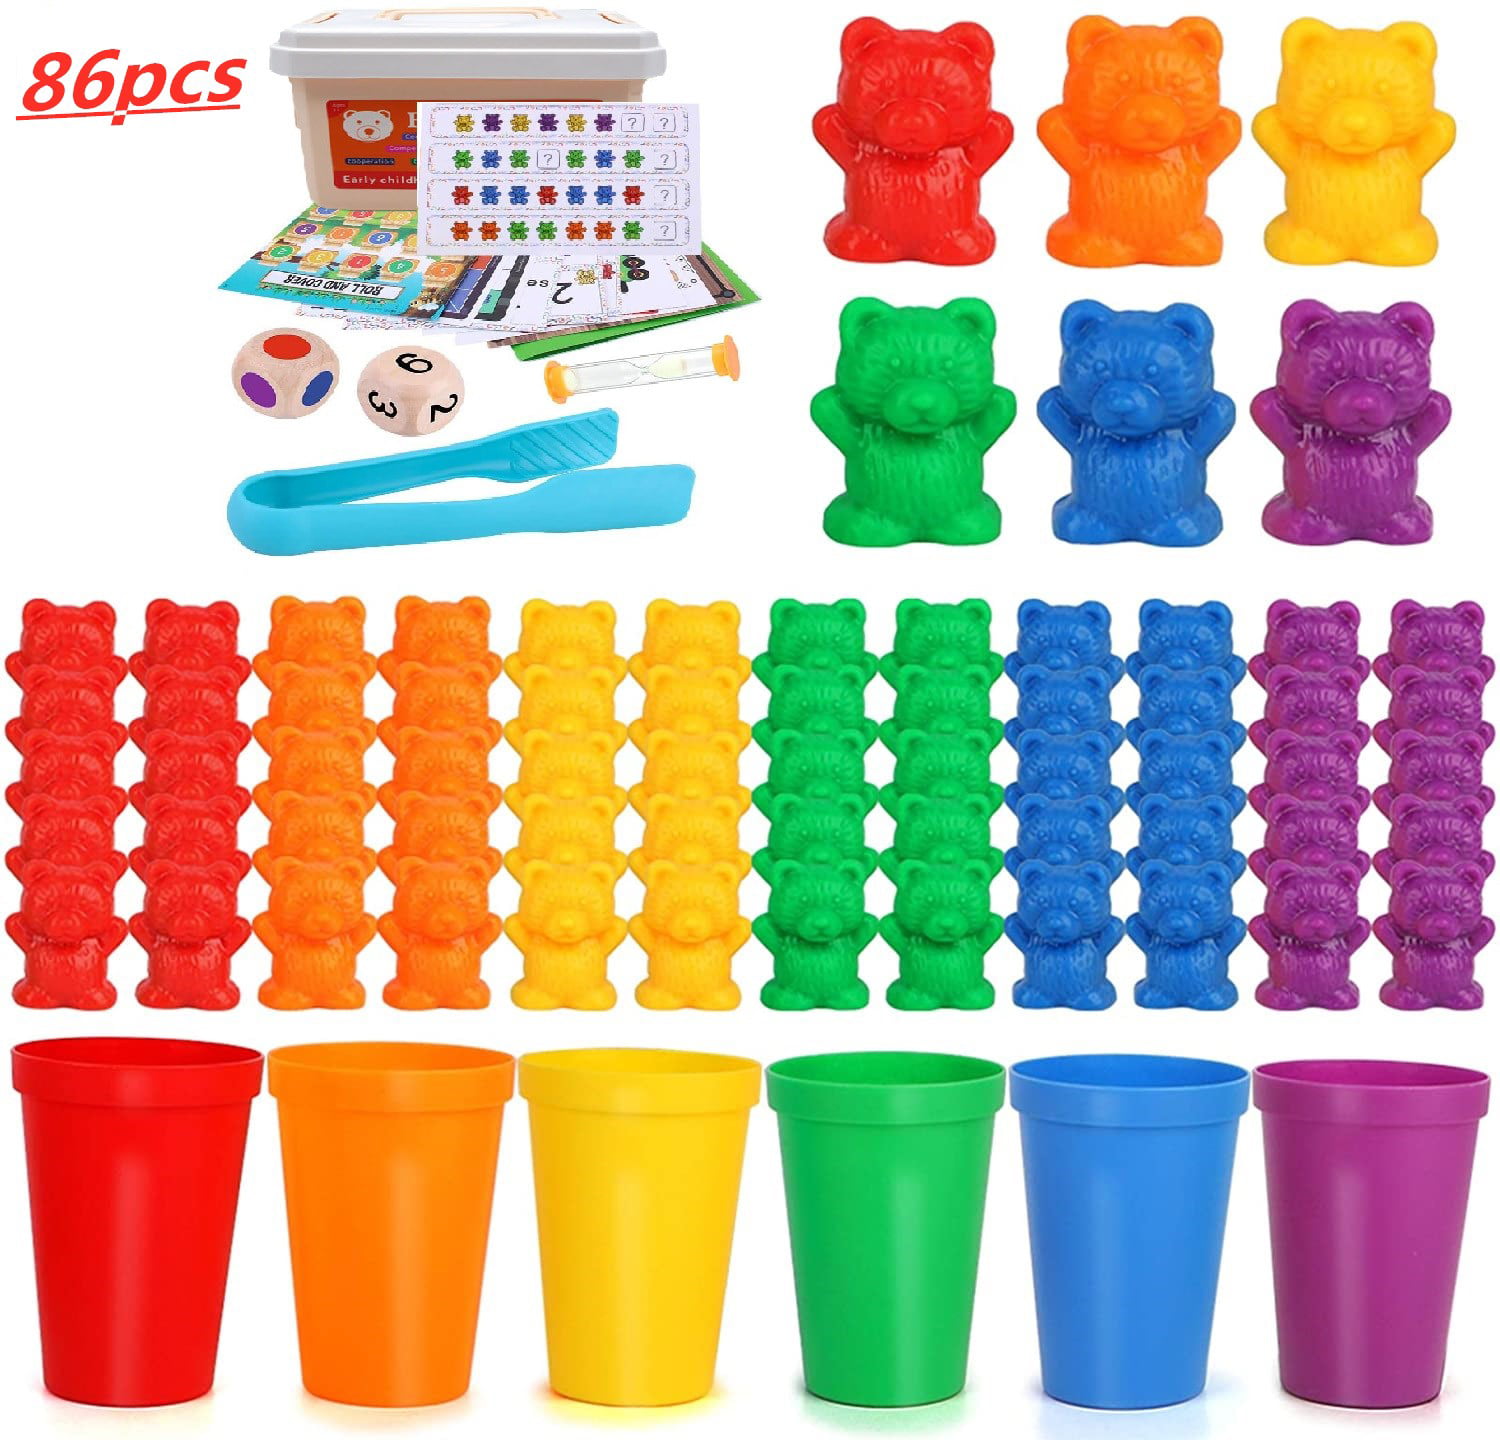 60 Counting Bears With Stacking Cups Montessori Color Sorting Matching Game Toys 